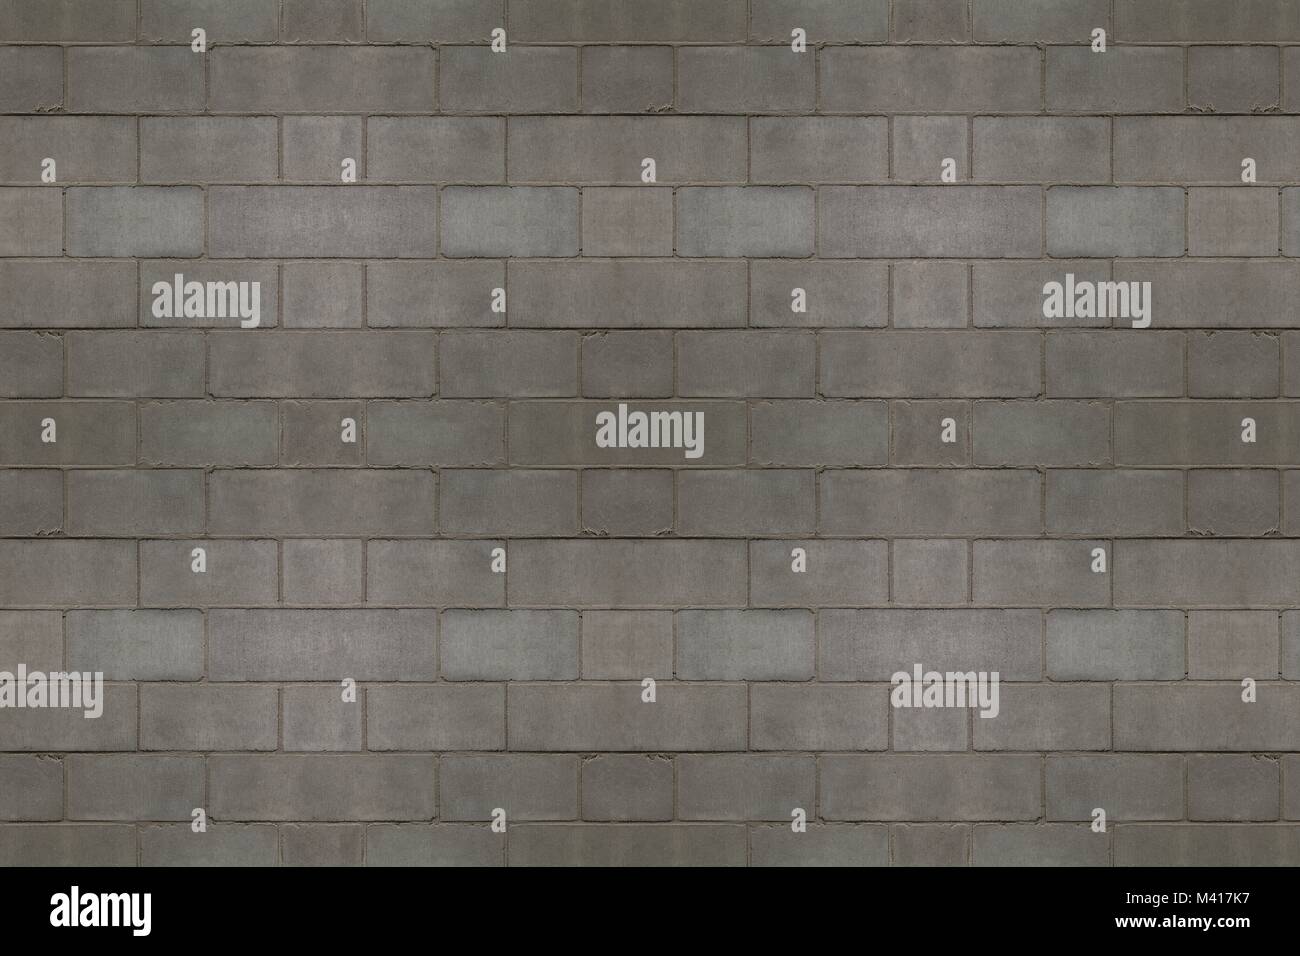 Concrete brick solid wall grey background Stock Photo